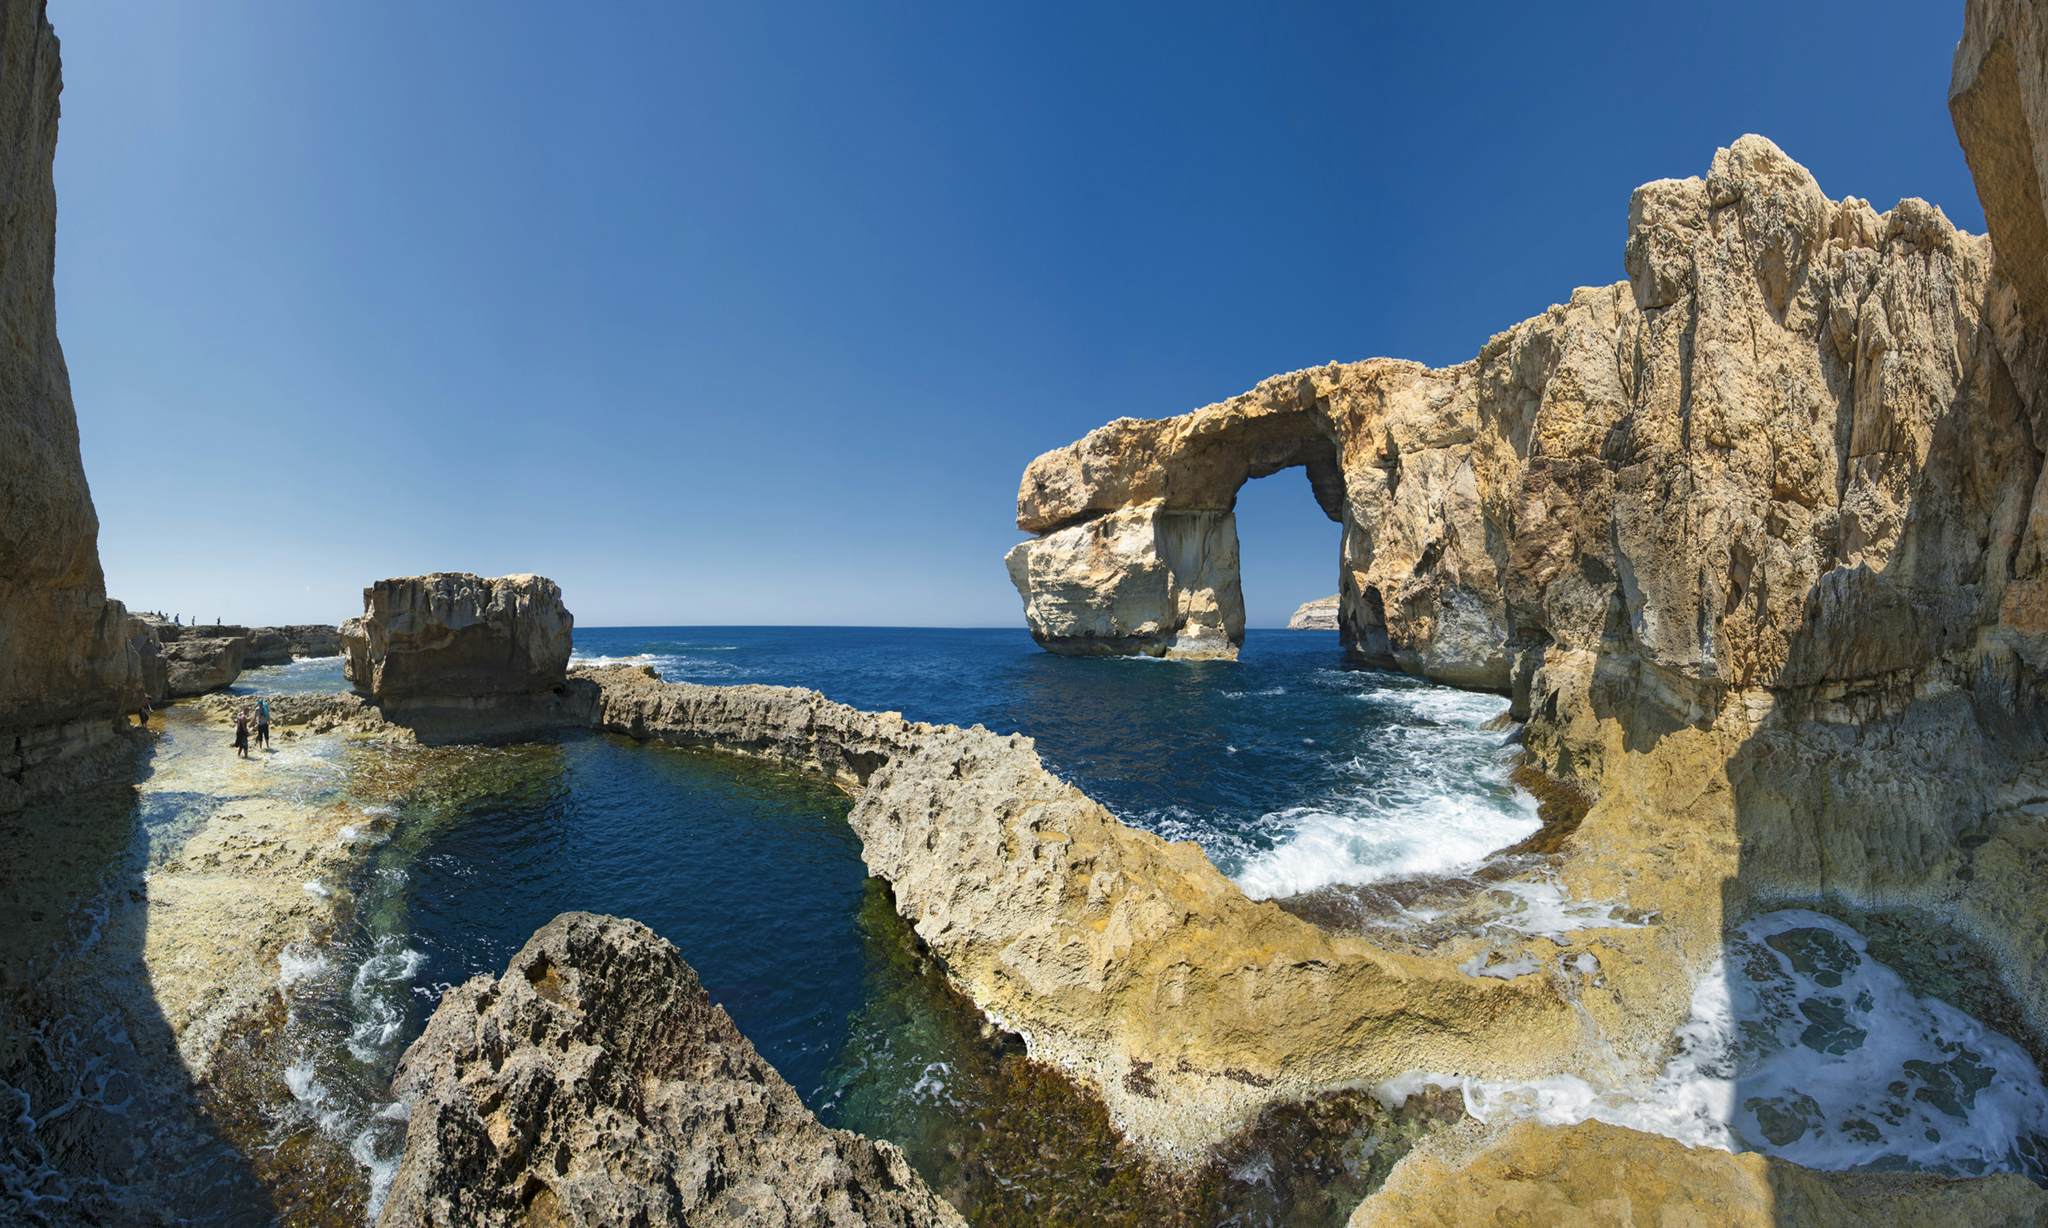 Malta S Collapsed Azure Window Rock Arch Has Found A New Purpose As A Top Dive Site Lonely Planet,Christmas Tree Wall Hanging Quilt Pattern